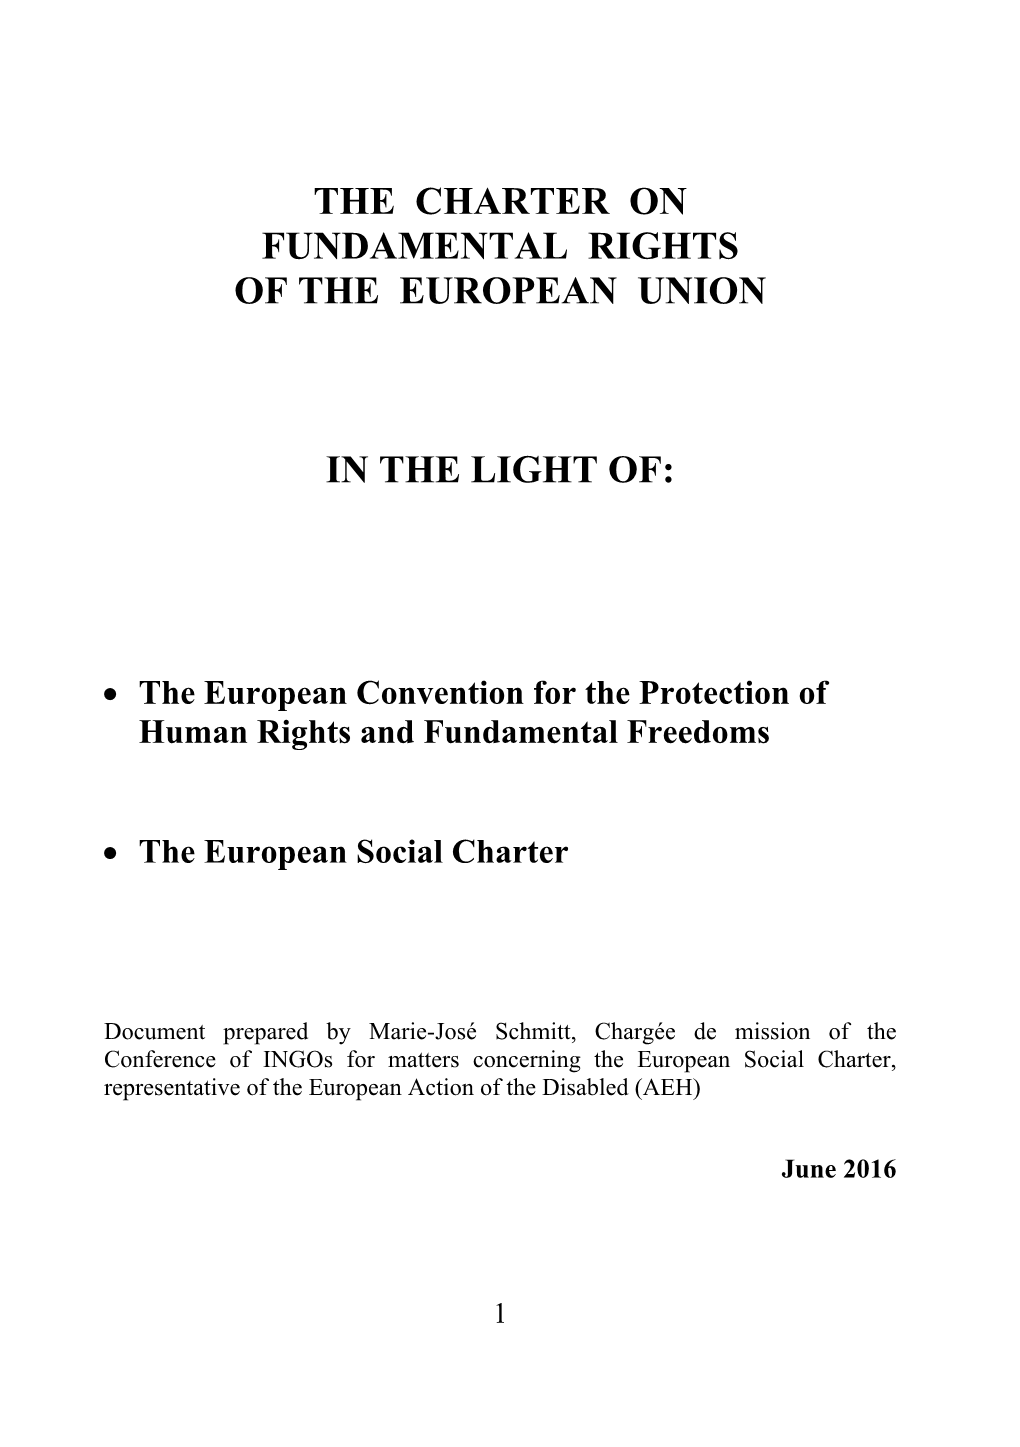 The Charter on Fundamental Rights of the European Union